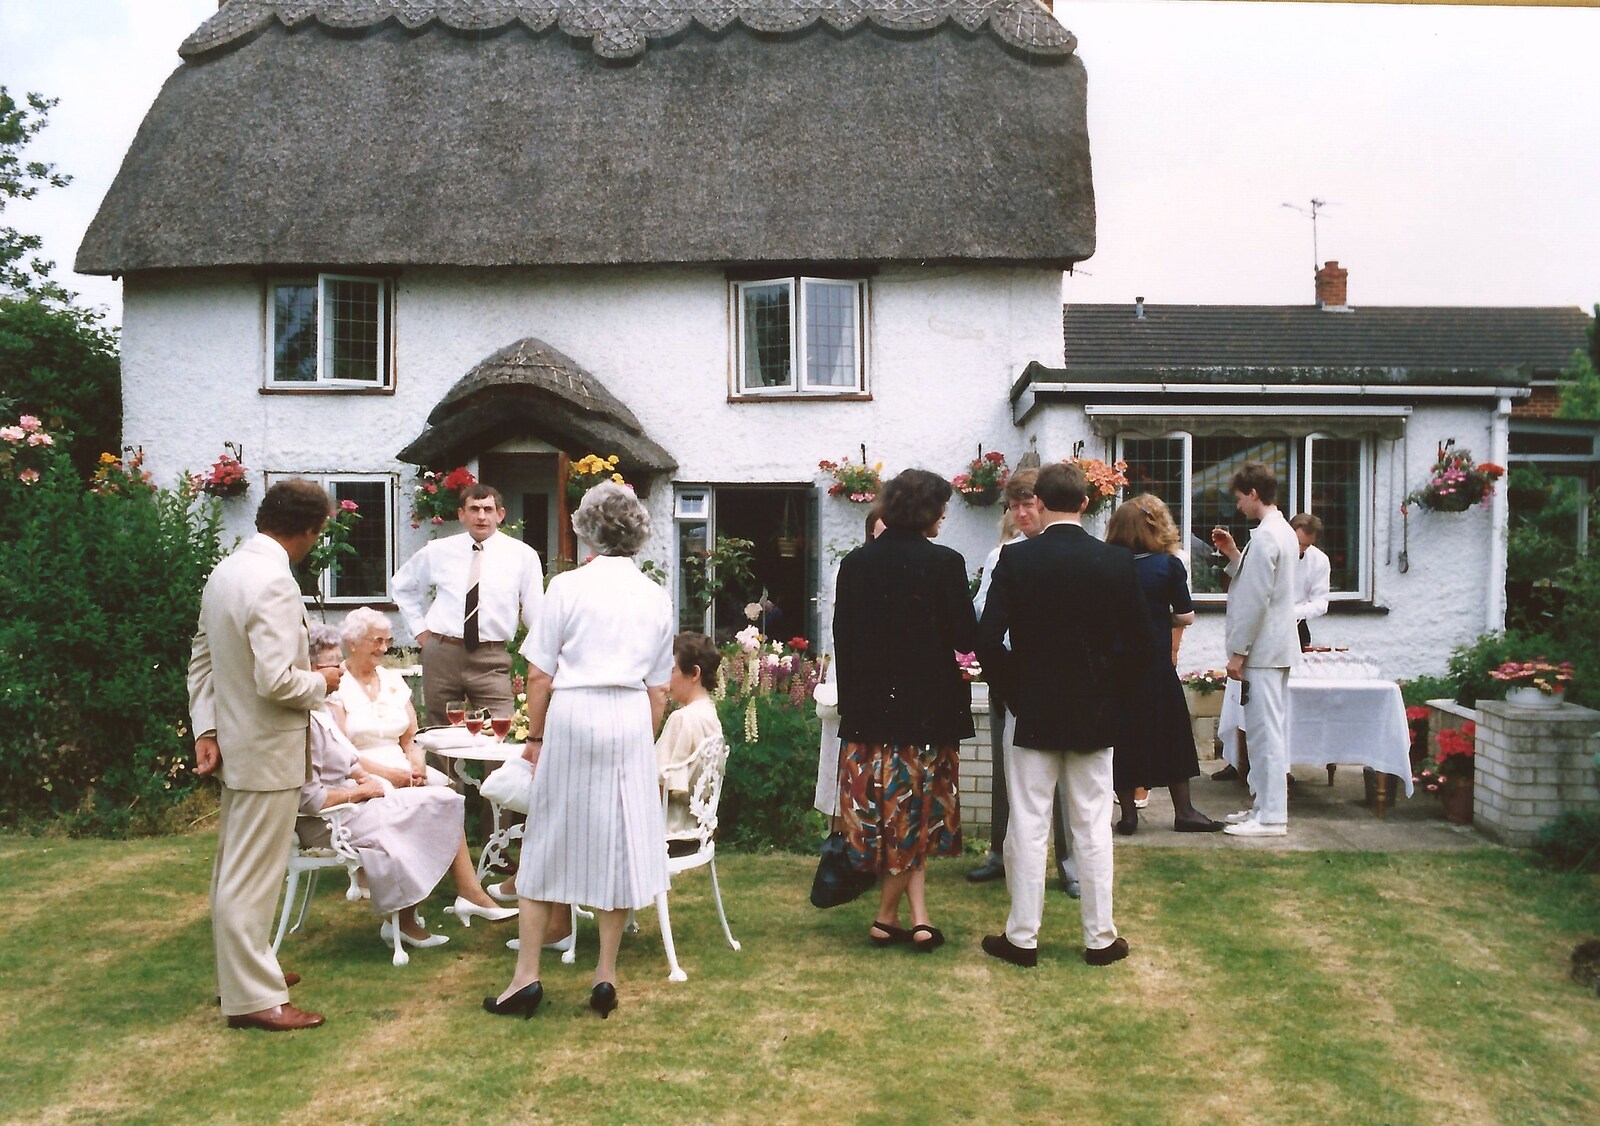 Outside the Willows in Bransgore from Mother and Mike's Wedding Reception, Bransgore, Dorset - 20th August 1988